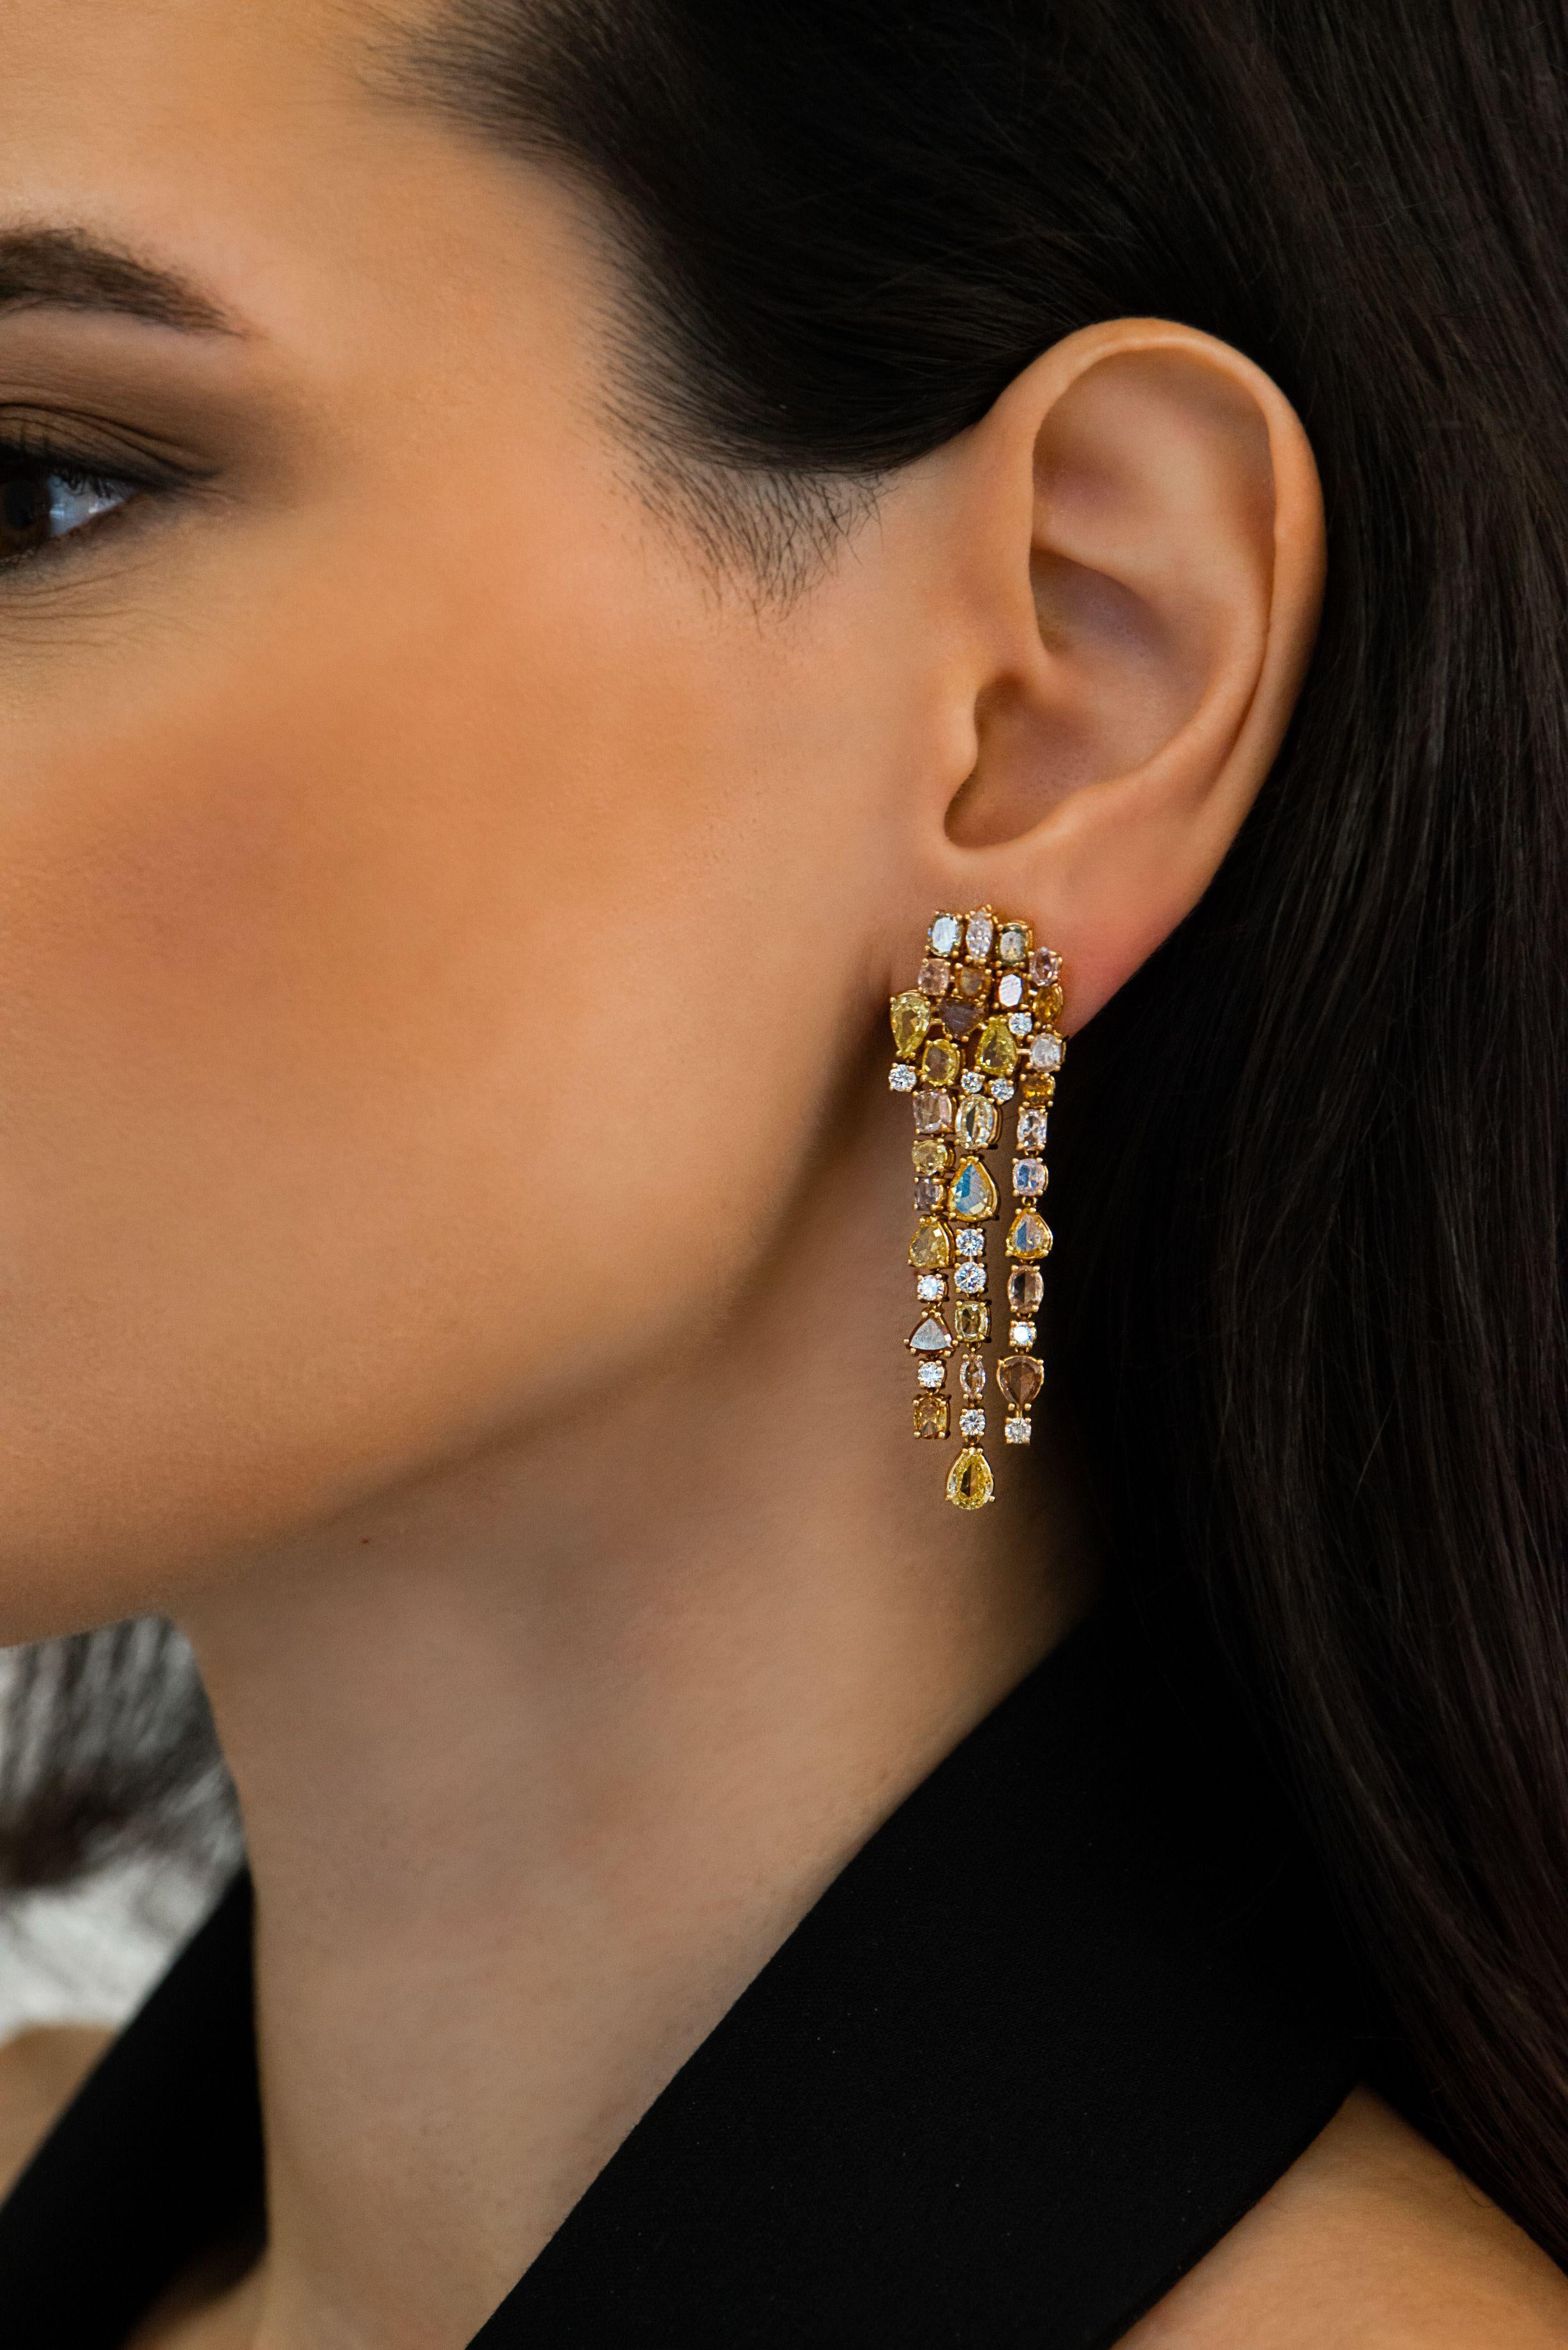 This 18K rose gold exclusive chandelier earrings are from our Divine collection. These chandelier earrings are a perfect combination of natural white diamonds in total of 1.22 Carat and fancy yellow diamonds in total of 7.51 Carat. The total metal